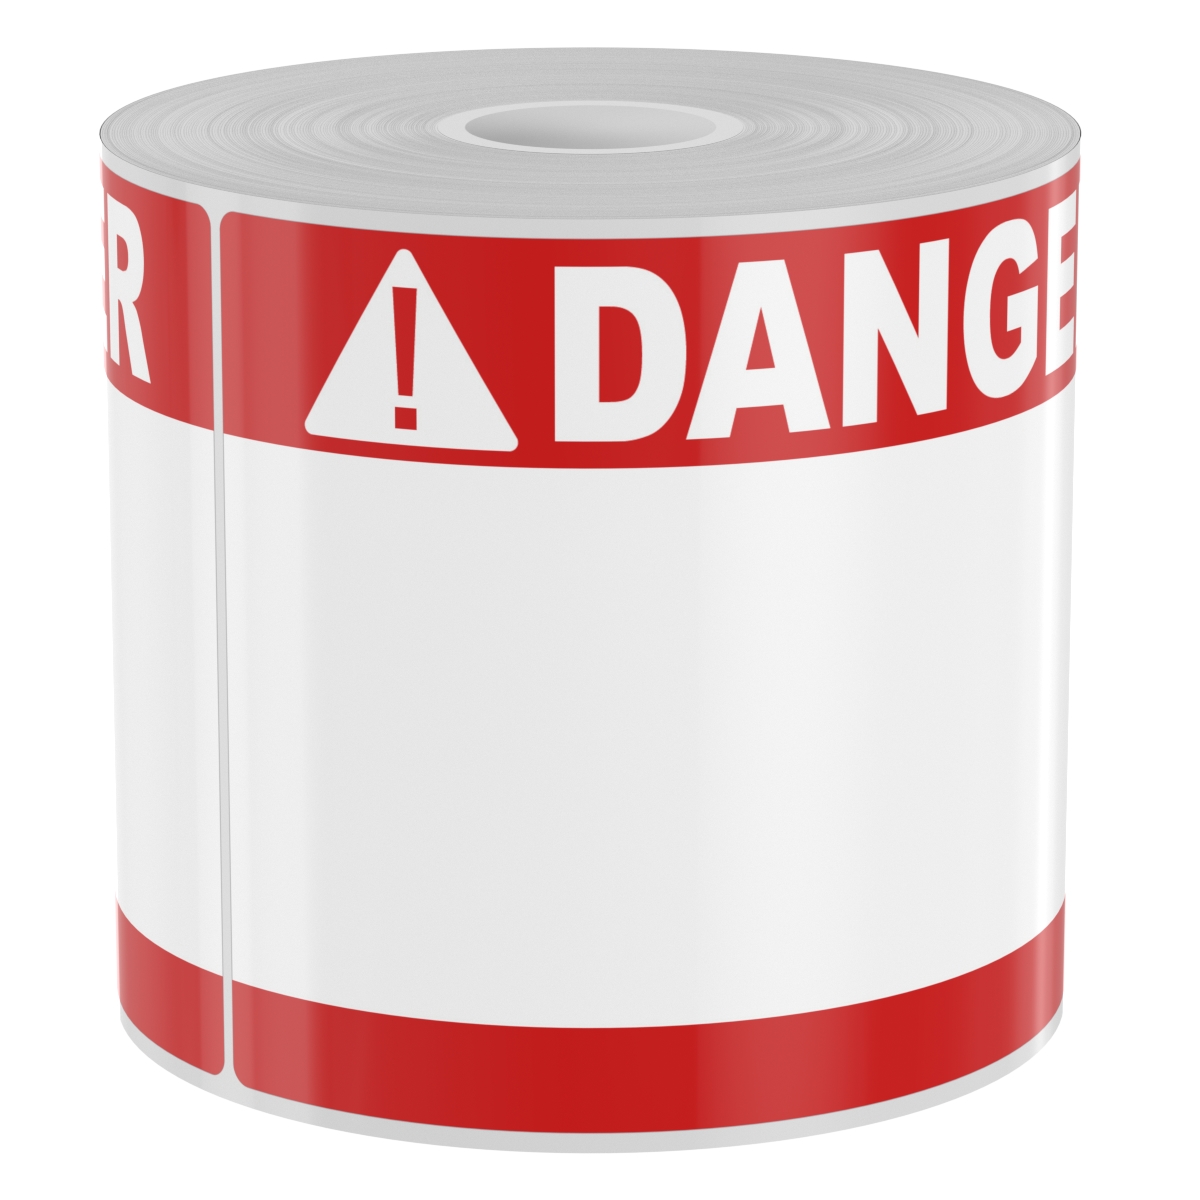 Ask a question about 250 4" x 6" High-Performance Die-Cut Red Double Band White Danger